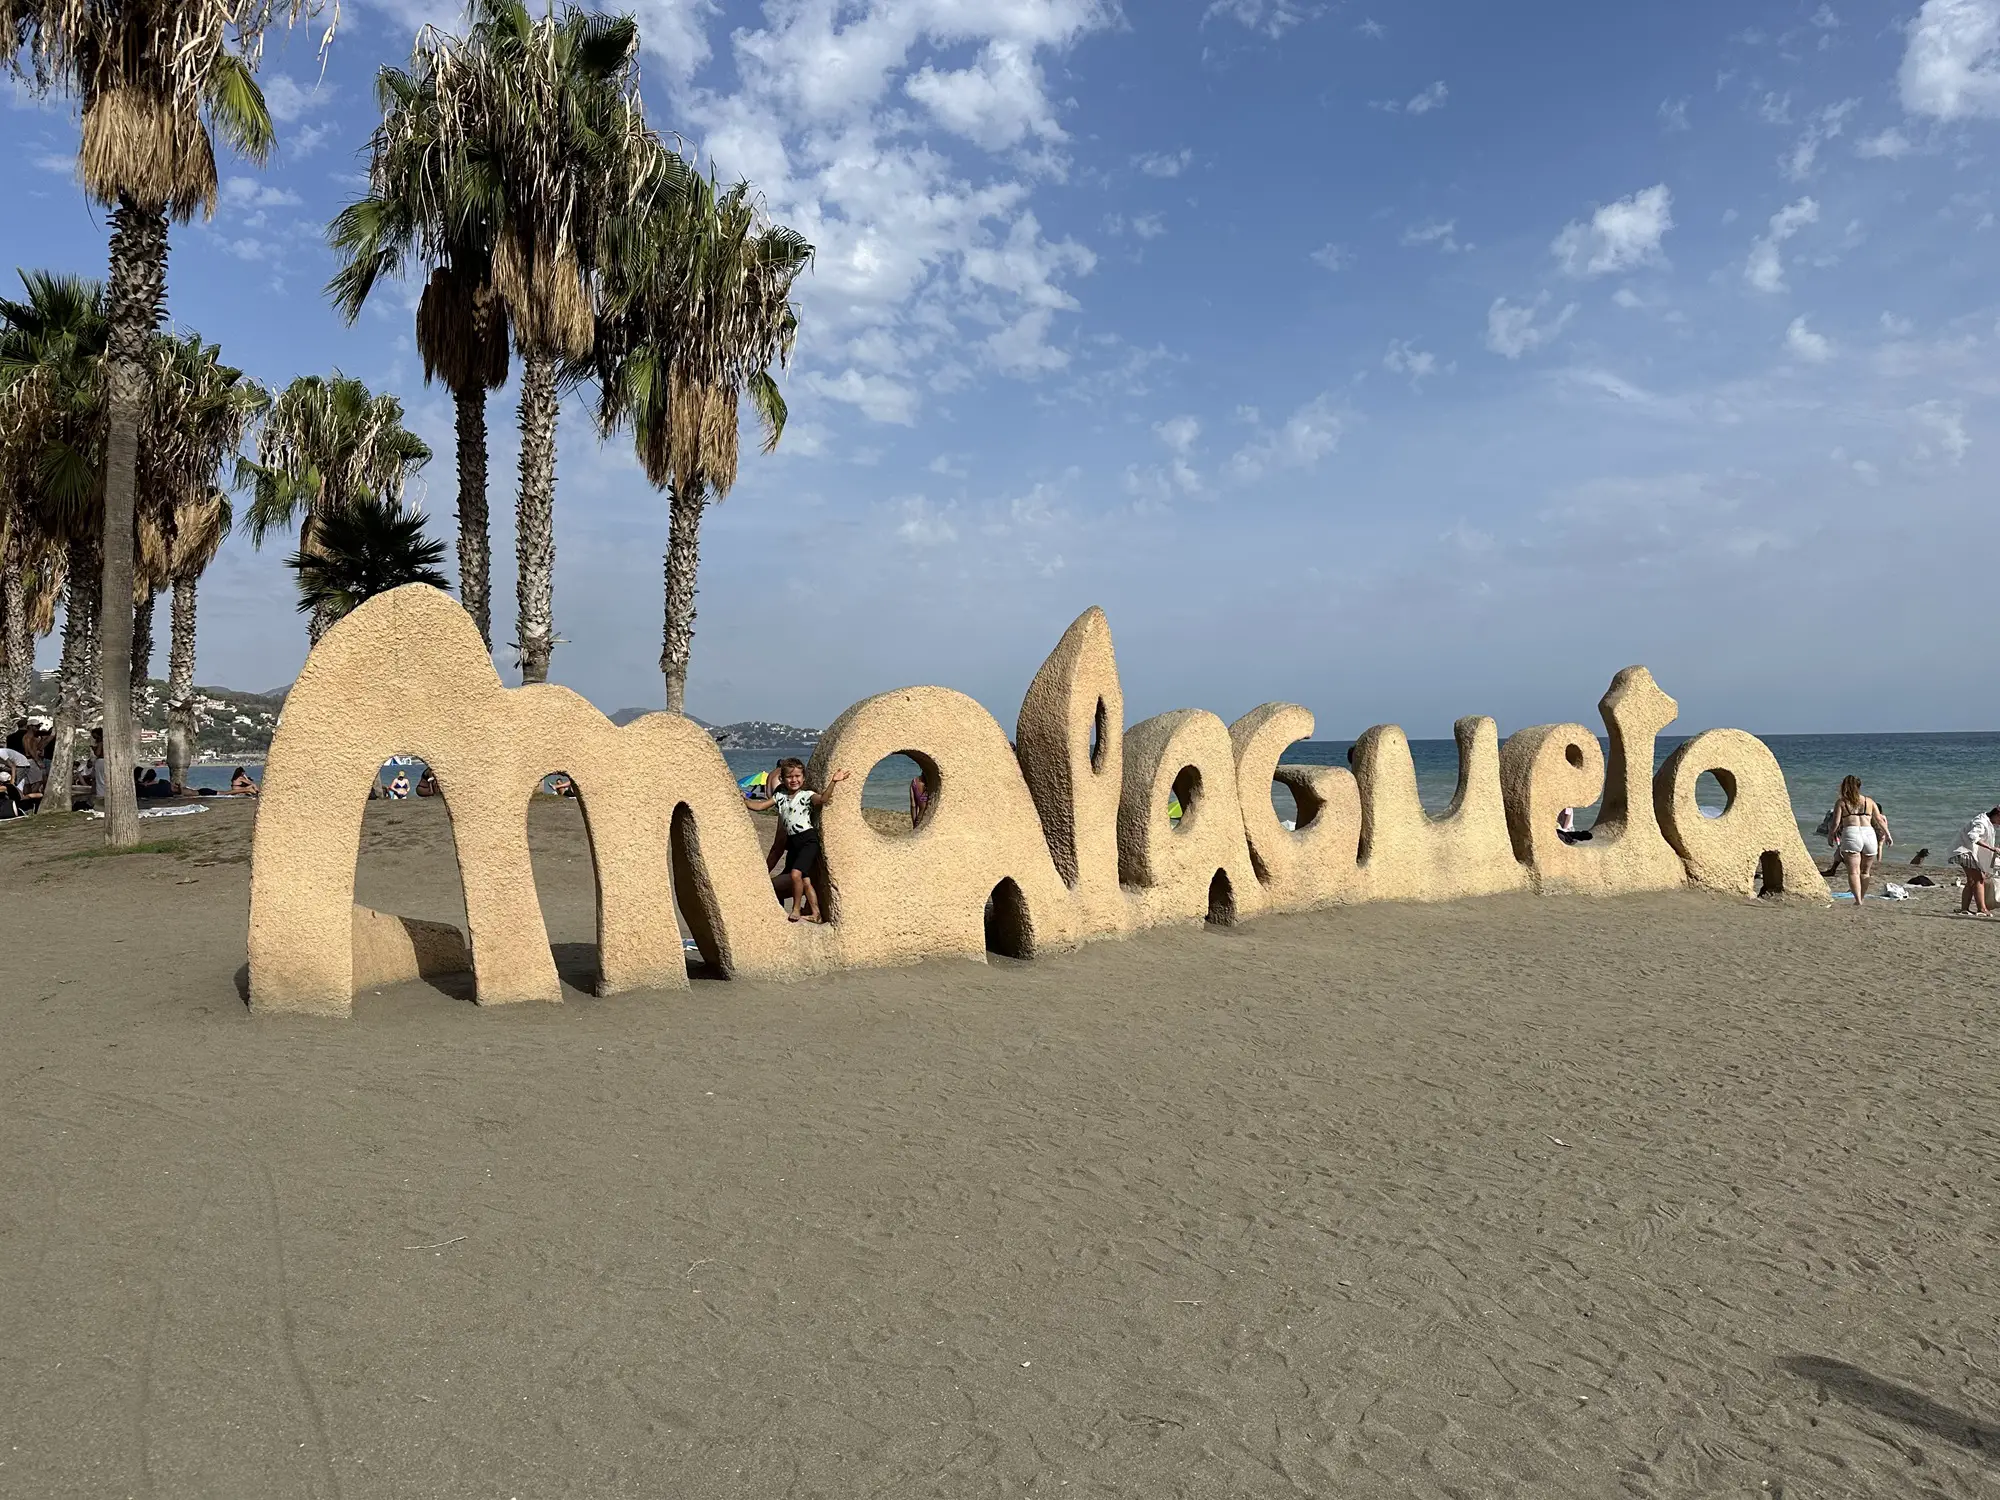 A great activity in Malaga with kids is to go to the beach like Malagueta Beach